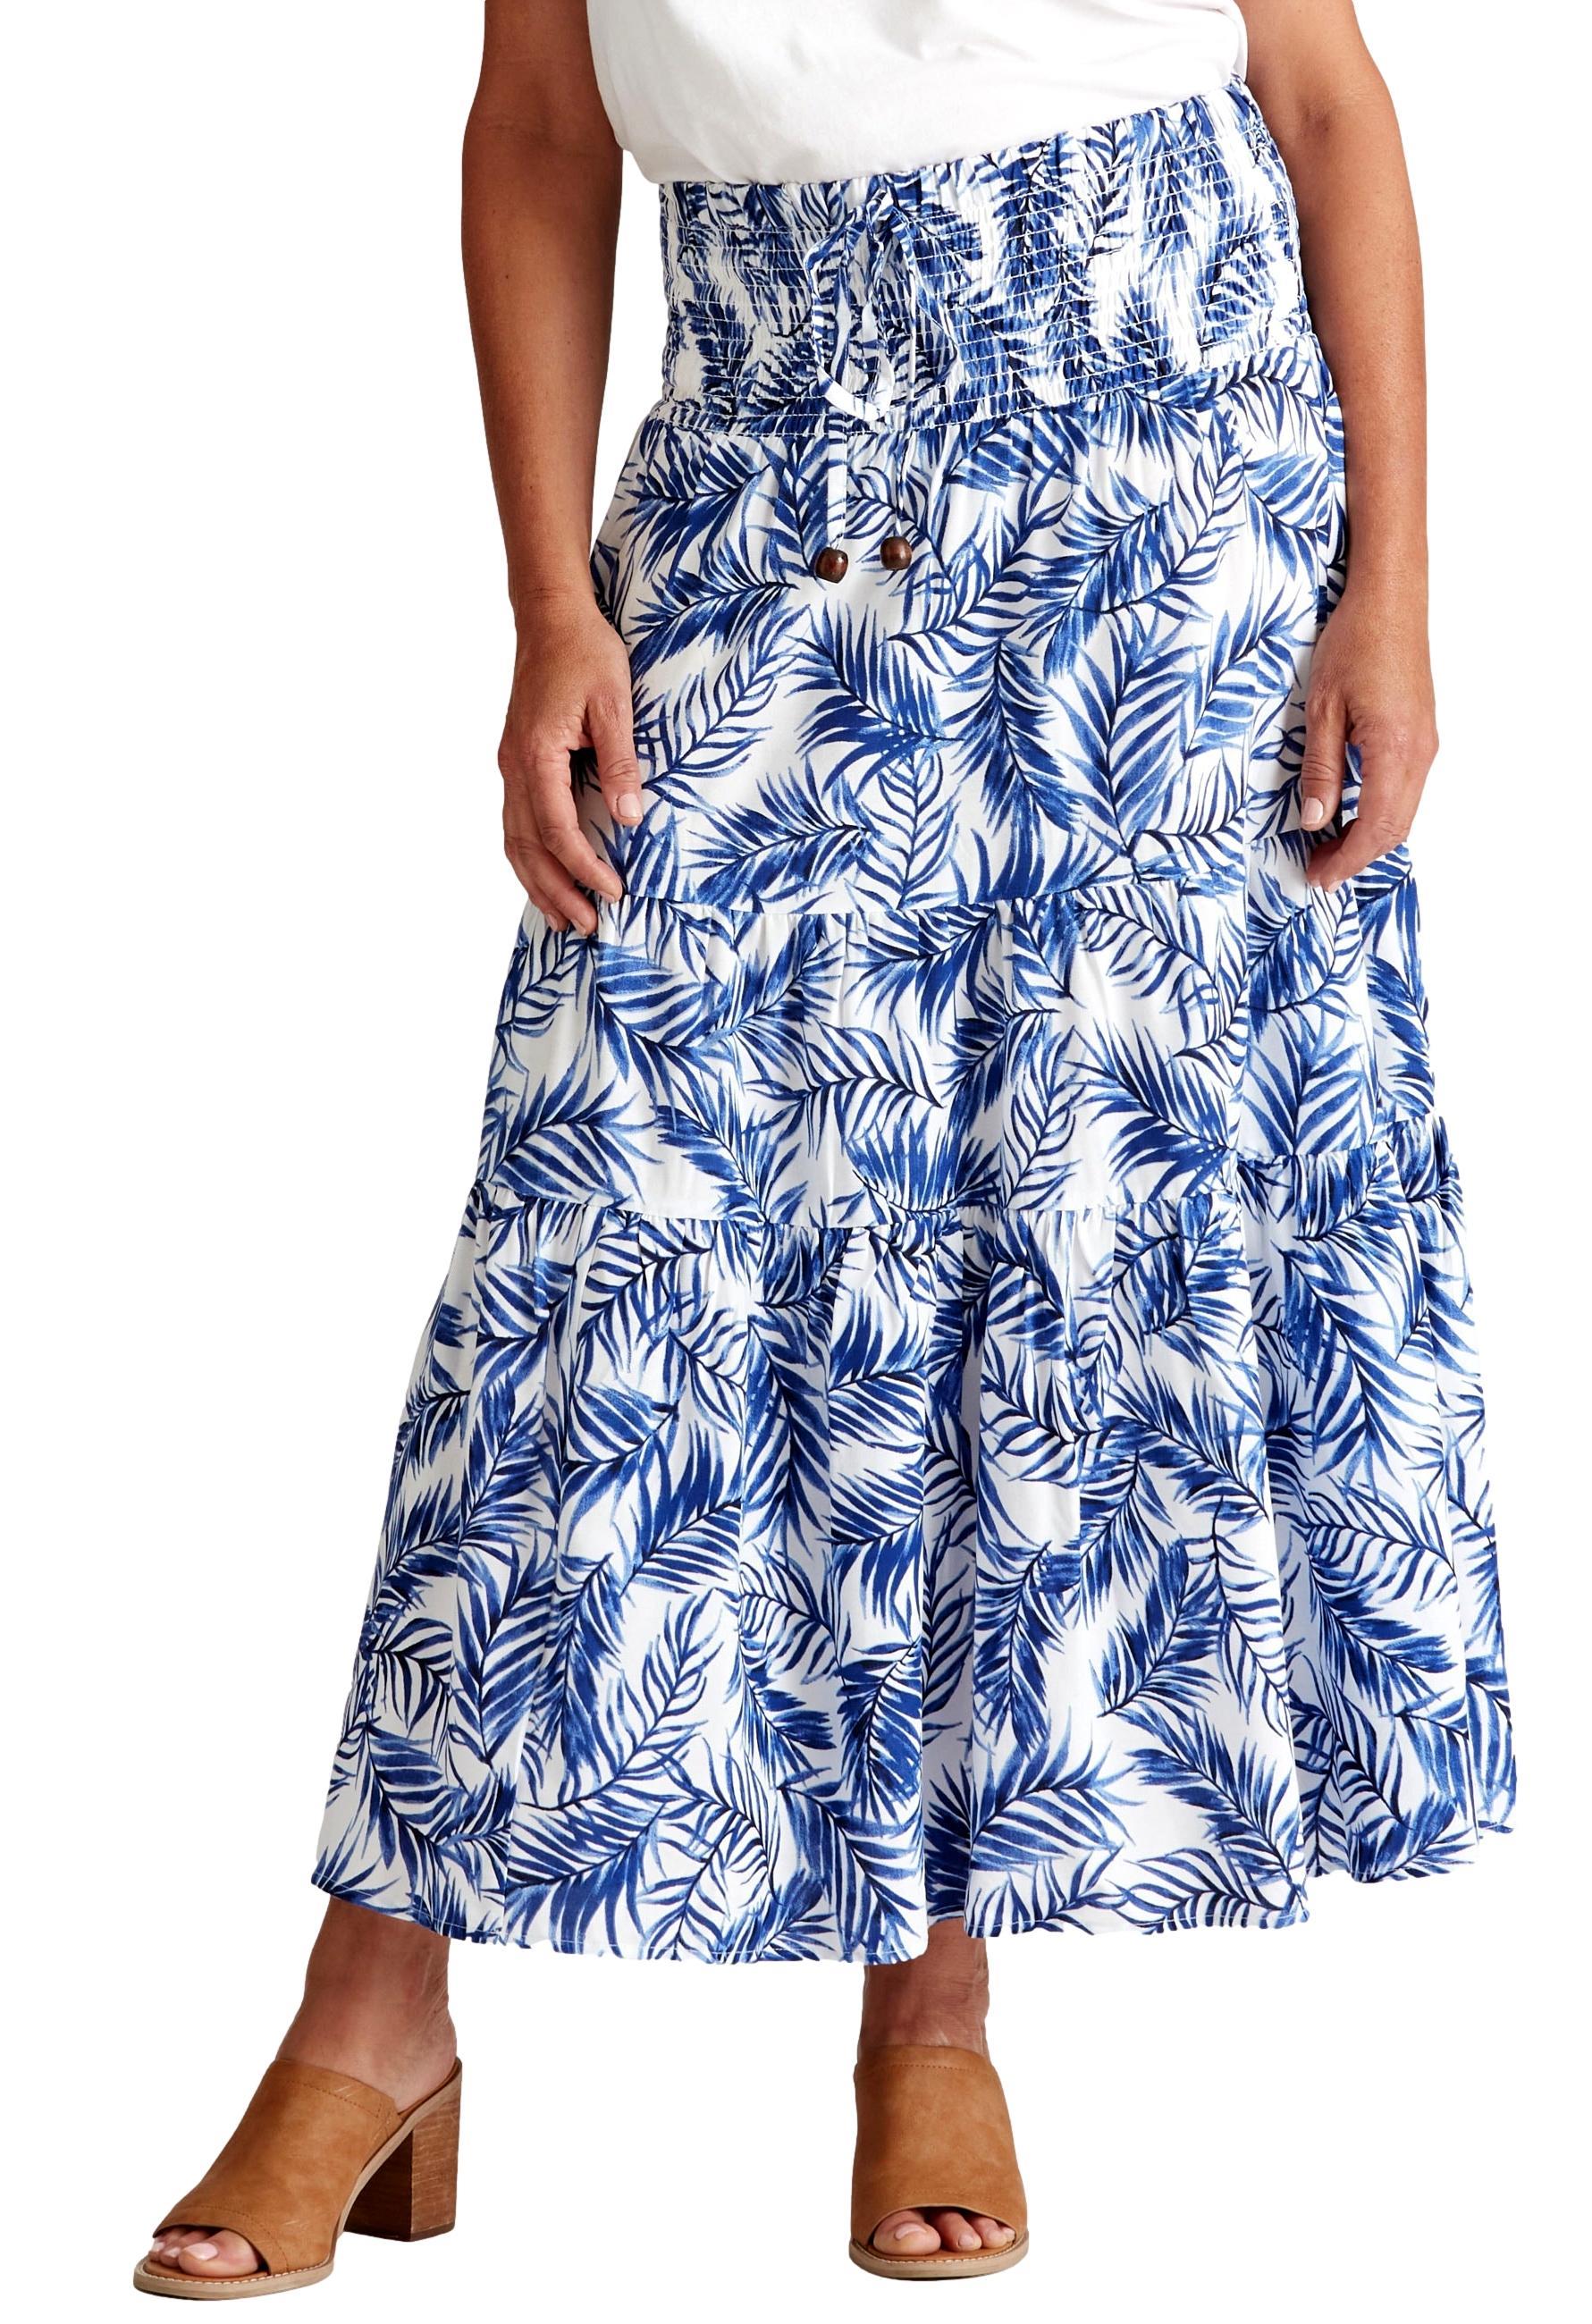 MILLERS - Womens Skirts - Maxi - Summer - Blue - Floral - A Line - Fashion - Fern - Relaxed Fit - - Tiered - Long - Casual Work Clothes - Office Wear